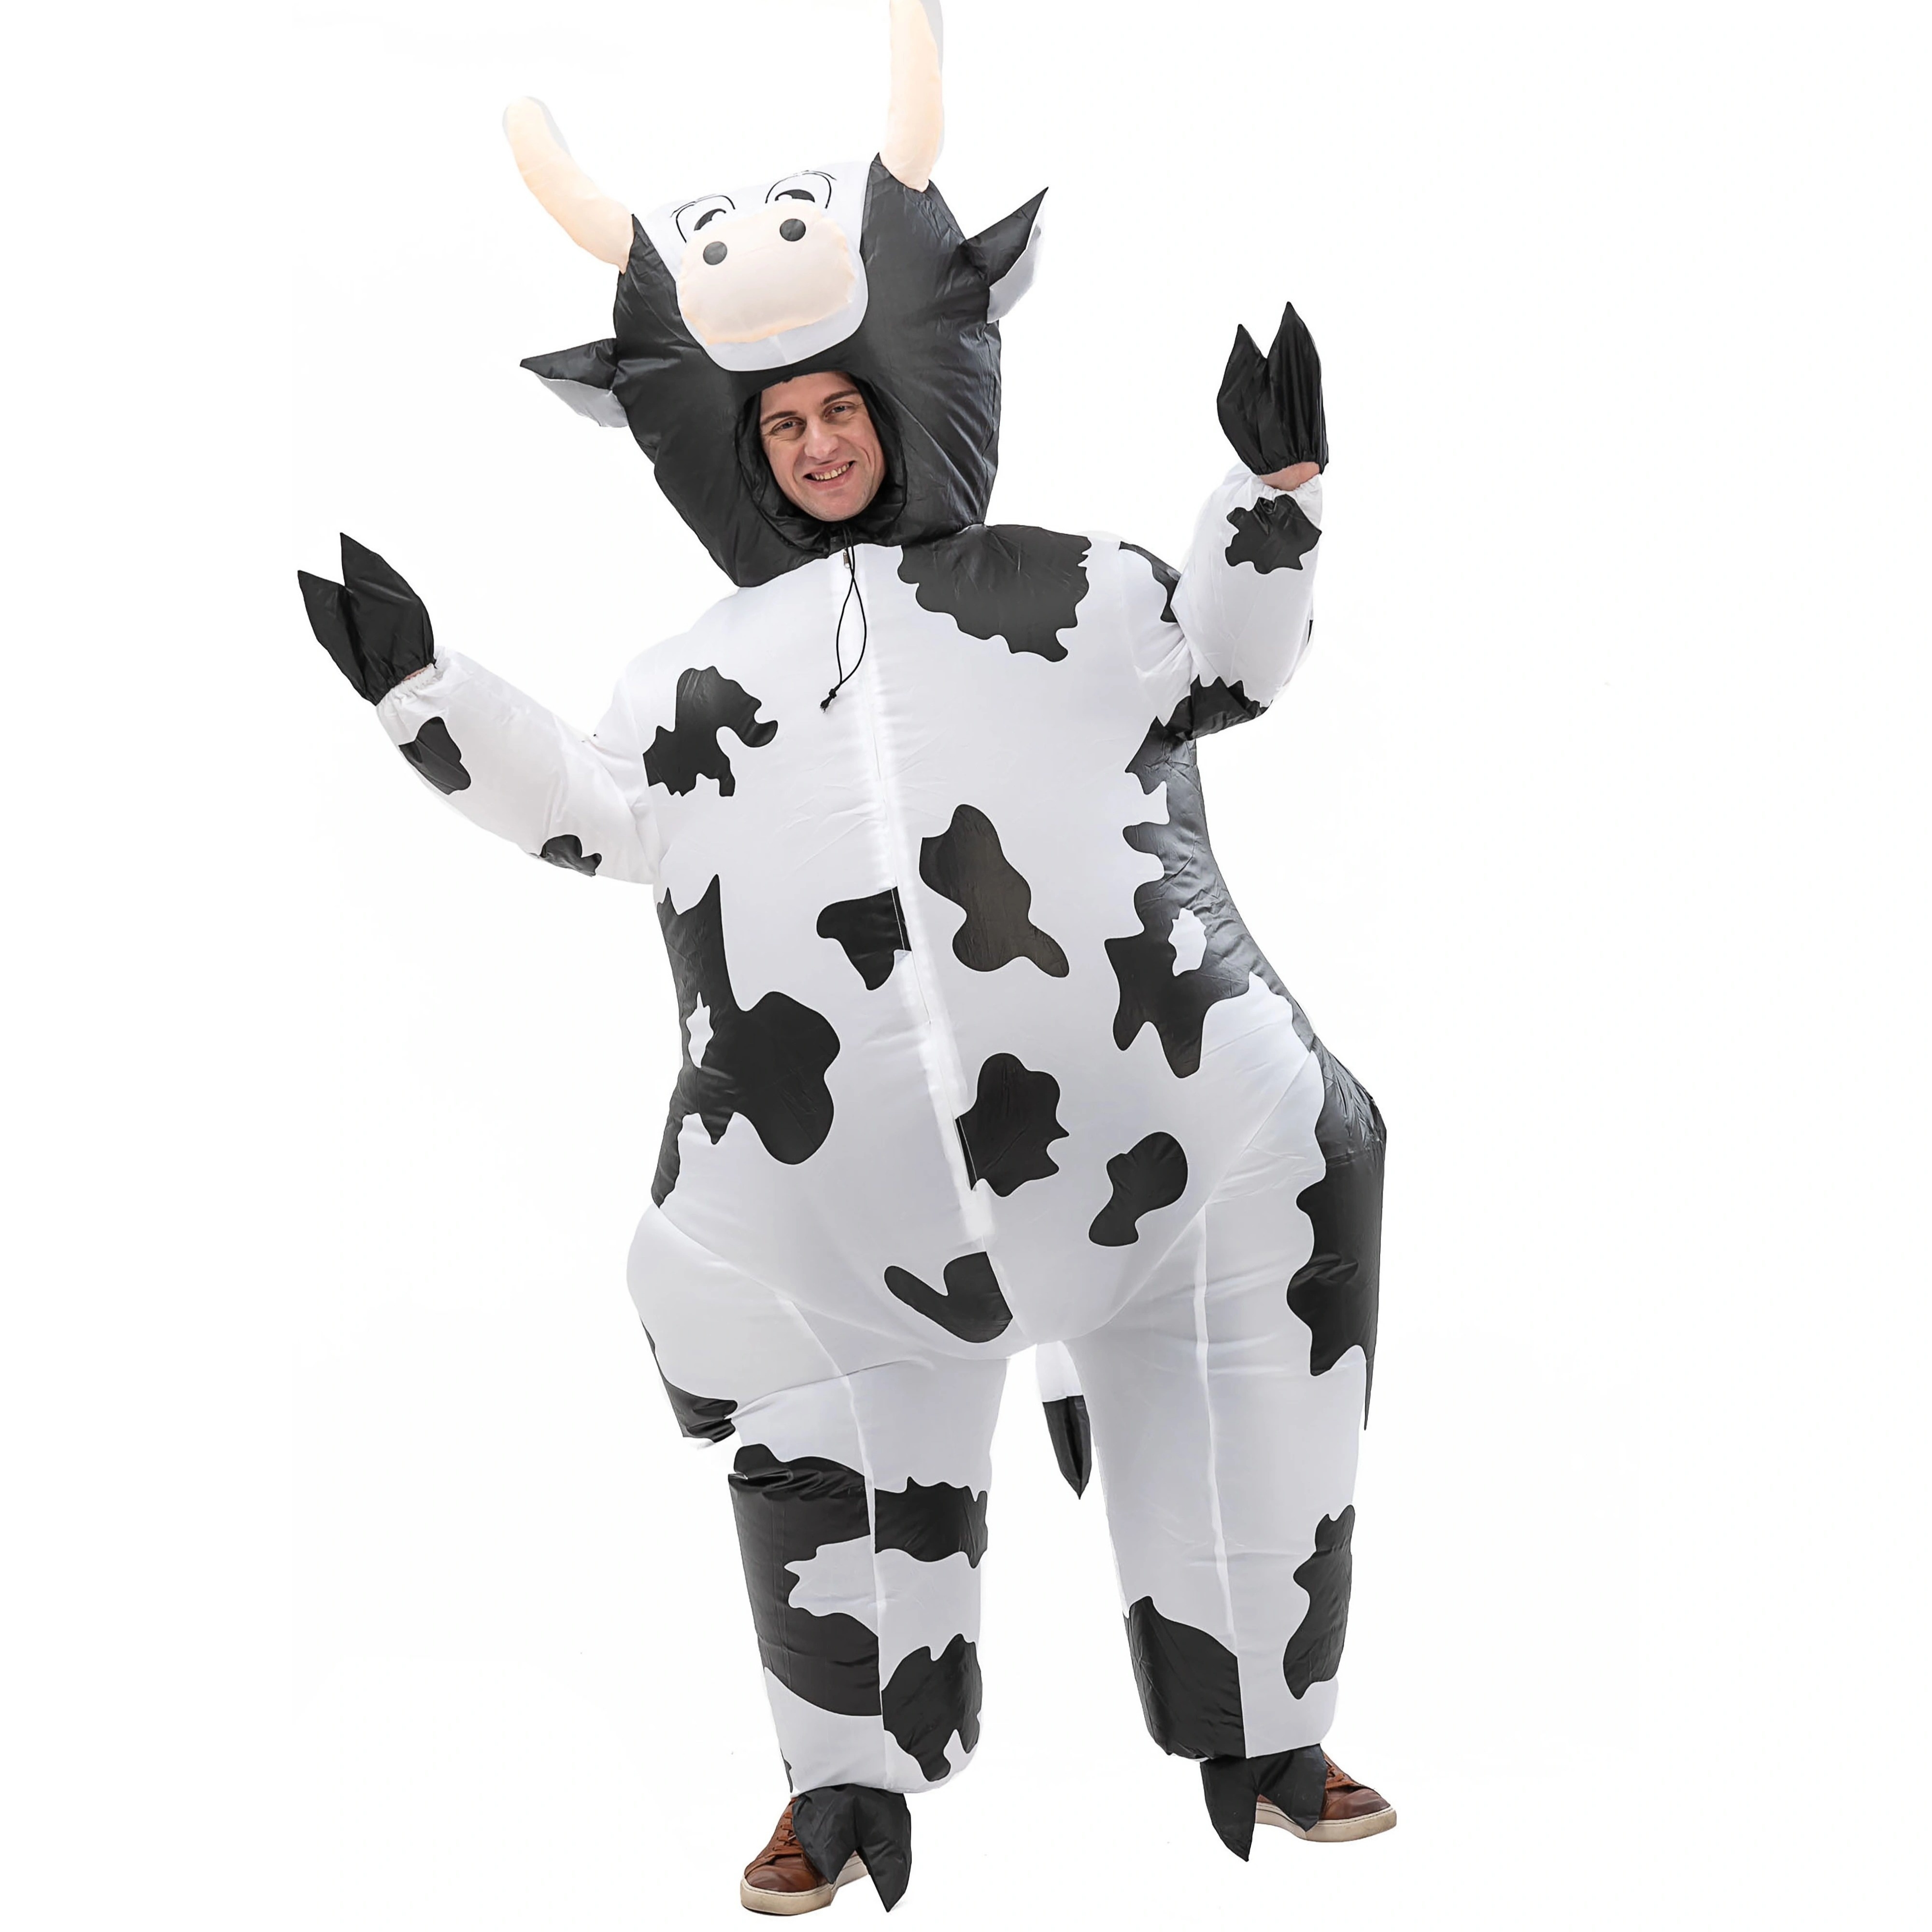 

Party Festival Halloween Cosplay Spoof Cow Inflatable Costume Adult Size (fits Height 155-195cm)